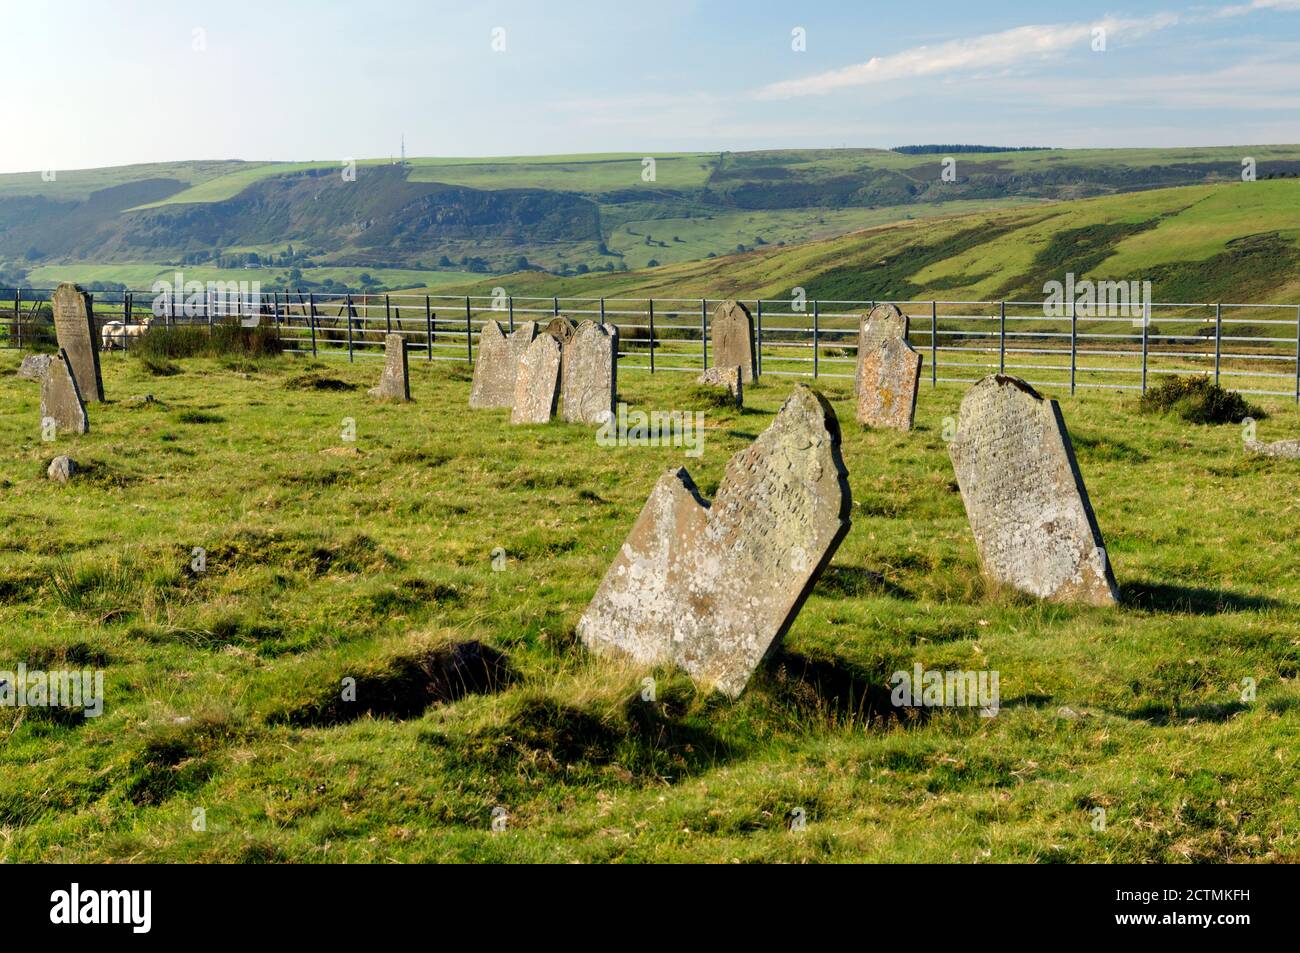 Cefn Golau Cholera Cemetery from the 1832 and 1849 Cholera epidemics, on remote hillside above Tredegar, Blaenau Gwent, South Wales Valleys. Stock Photo